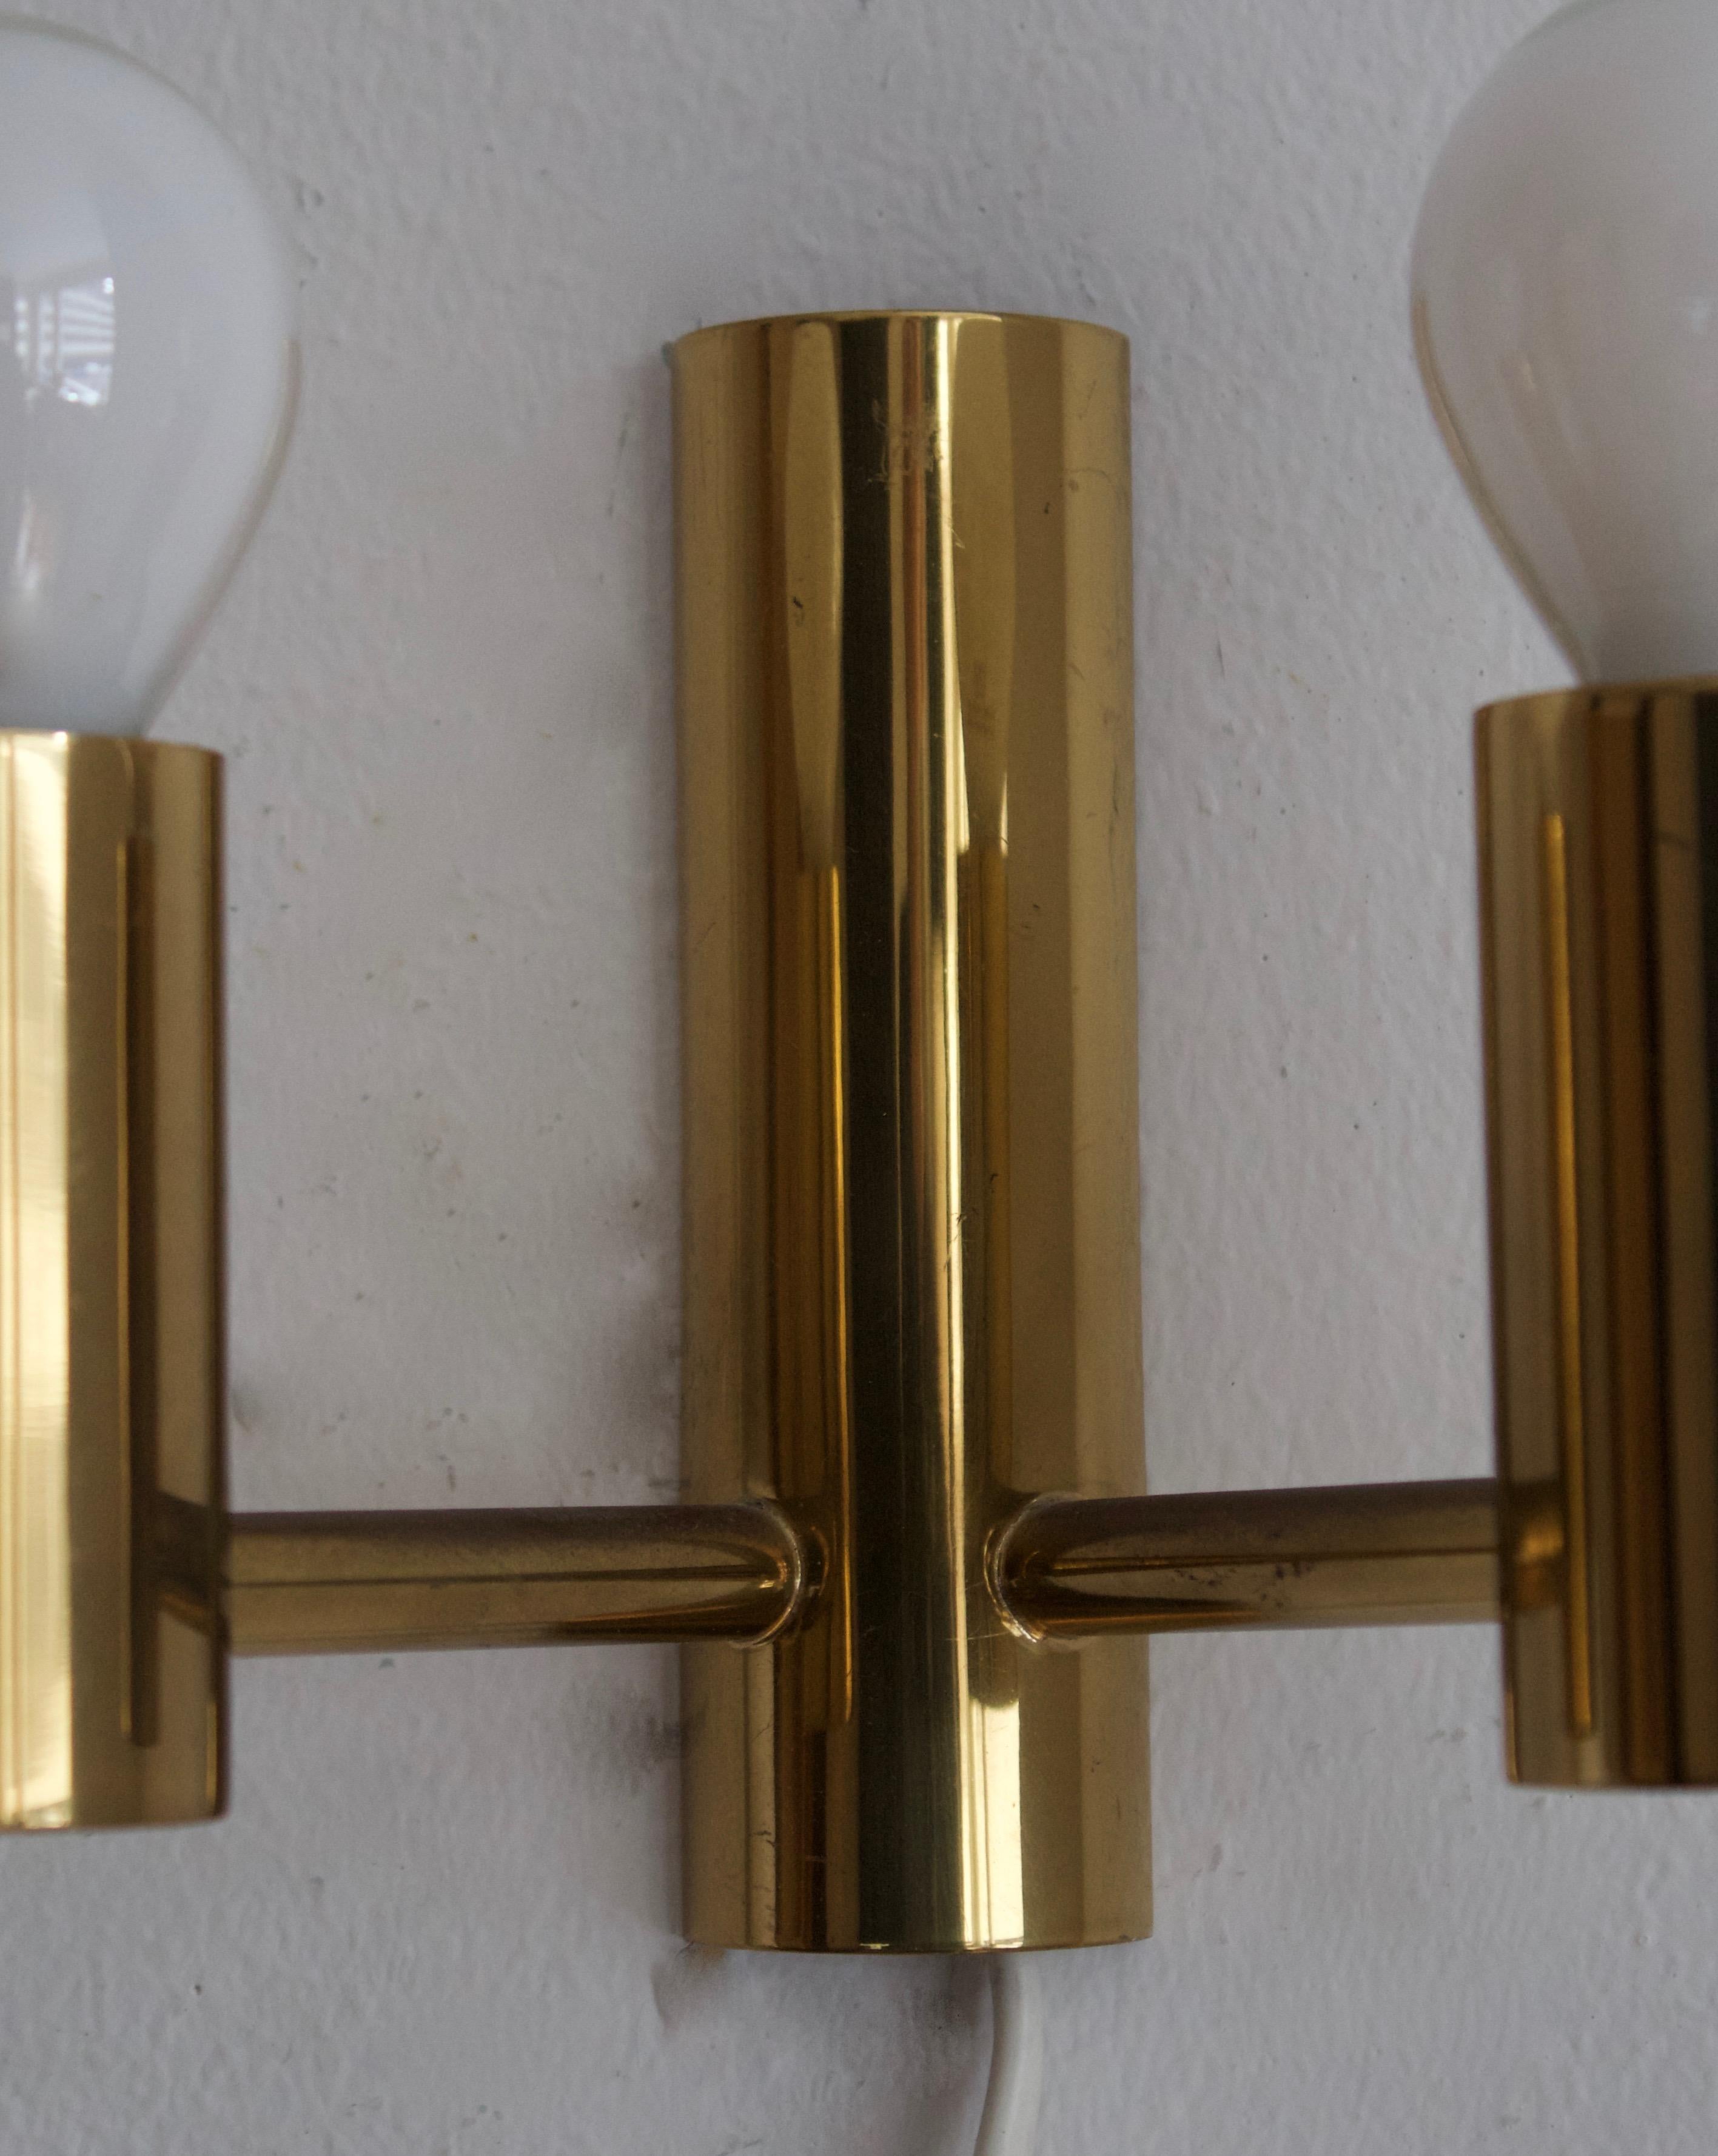 Mid-20th Century Sven Mejlstrøm, Two-armed Wall Lights, Brass, Fabric, Denmark, 1960s For Sale